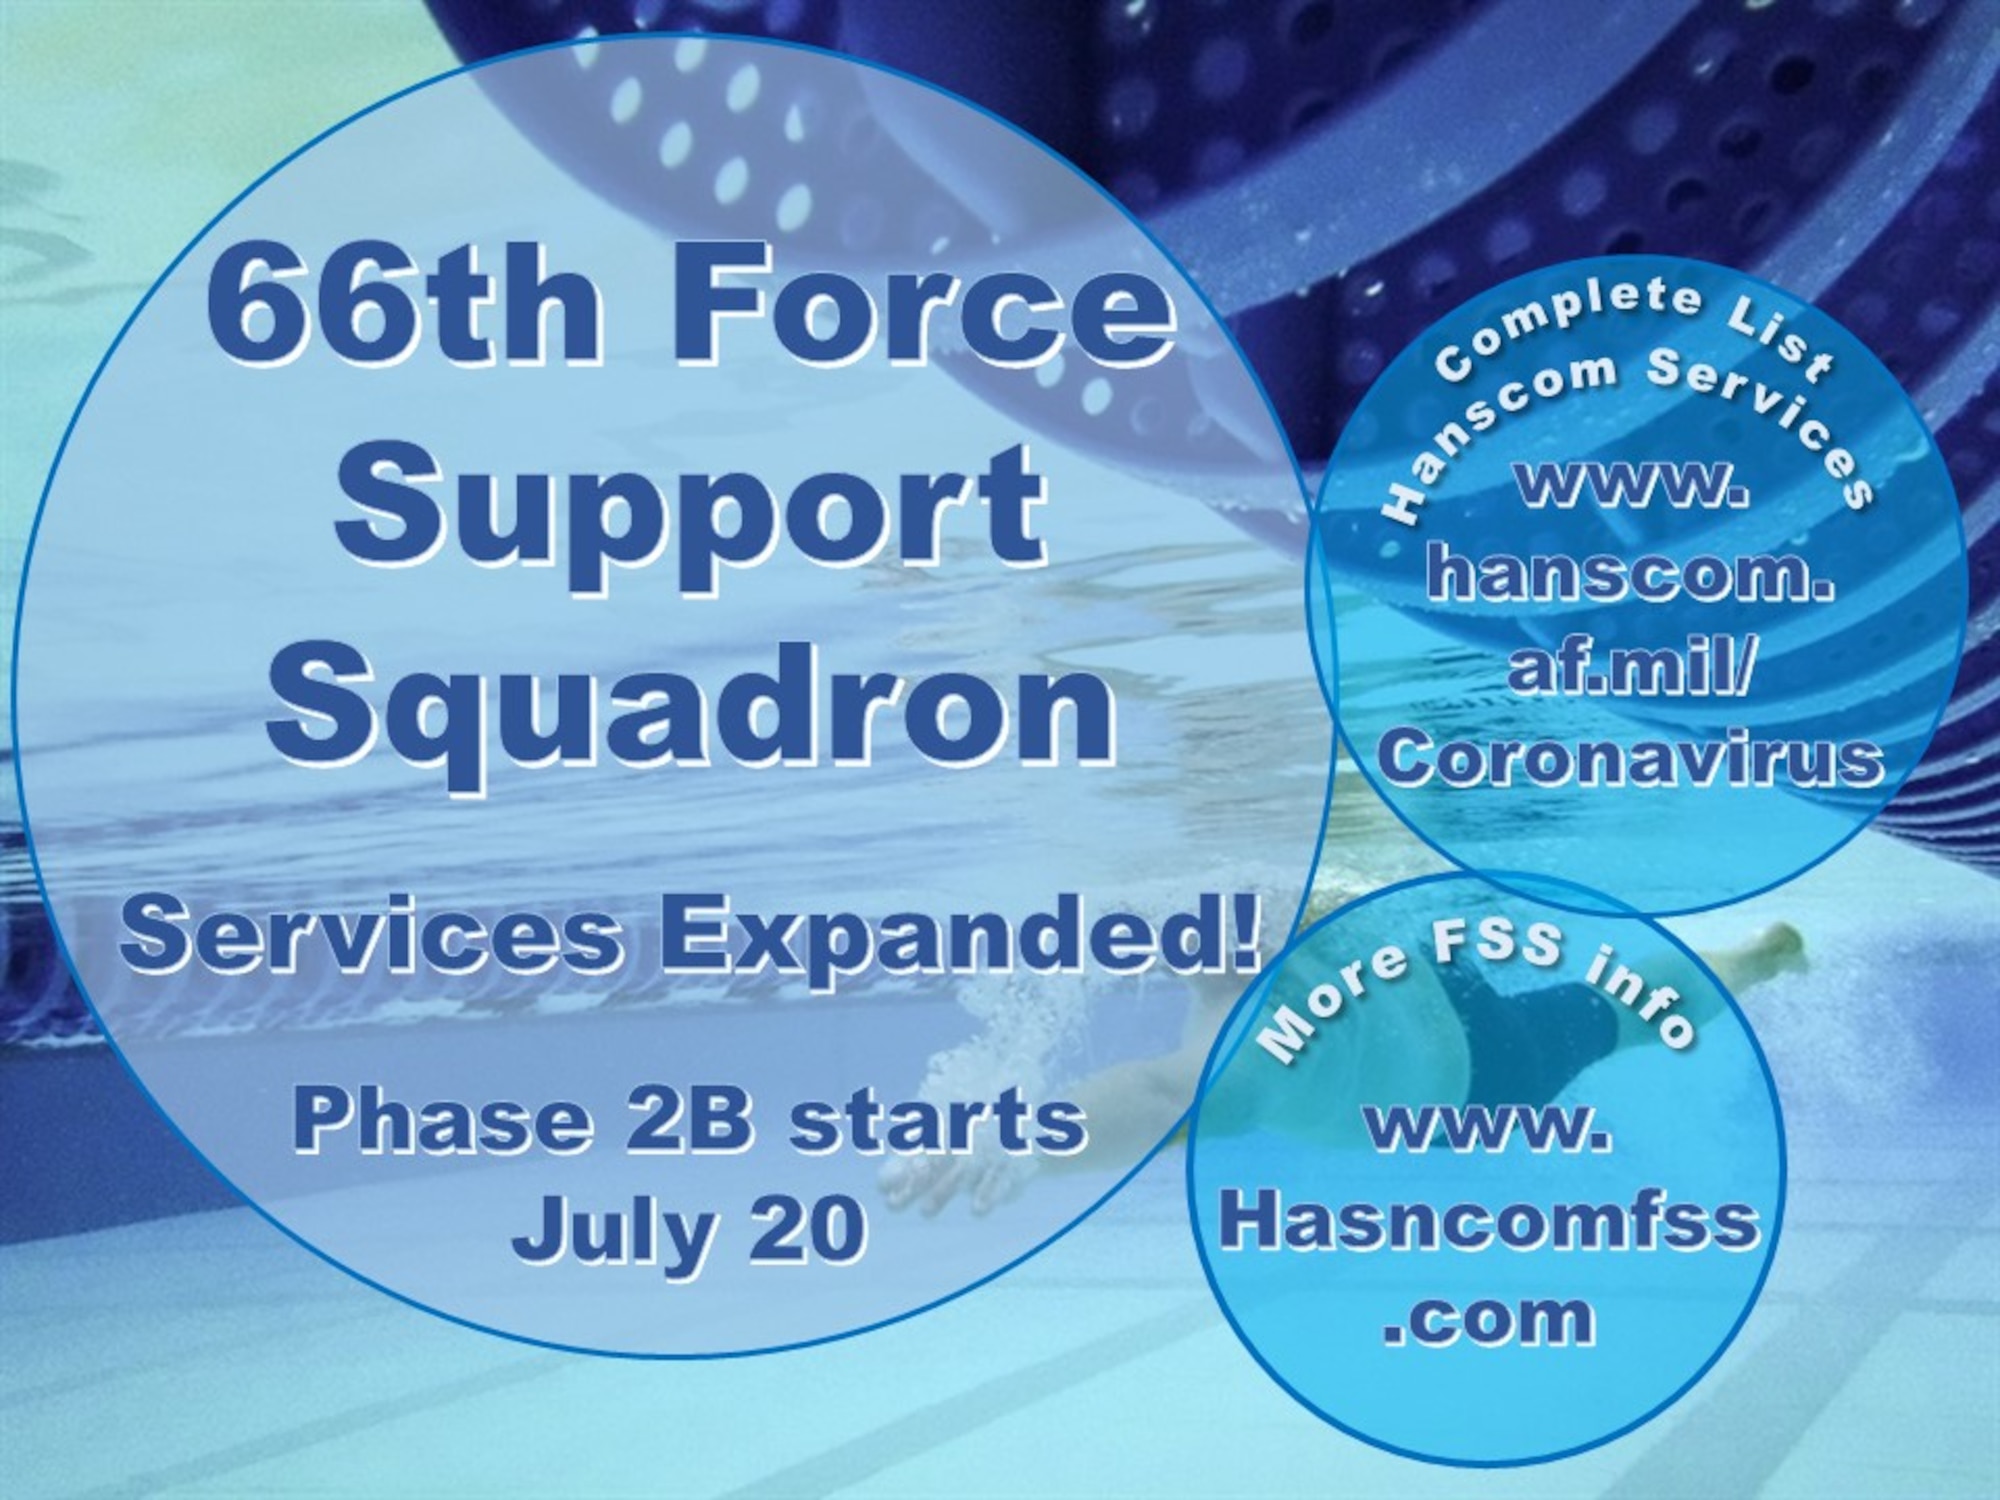 The 66th Force Support Squadron will be expanding facility and service availability in Phase 2B beginning July 20.